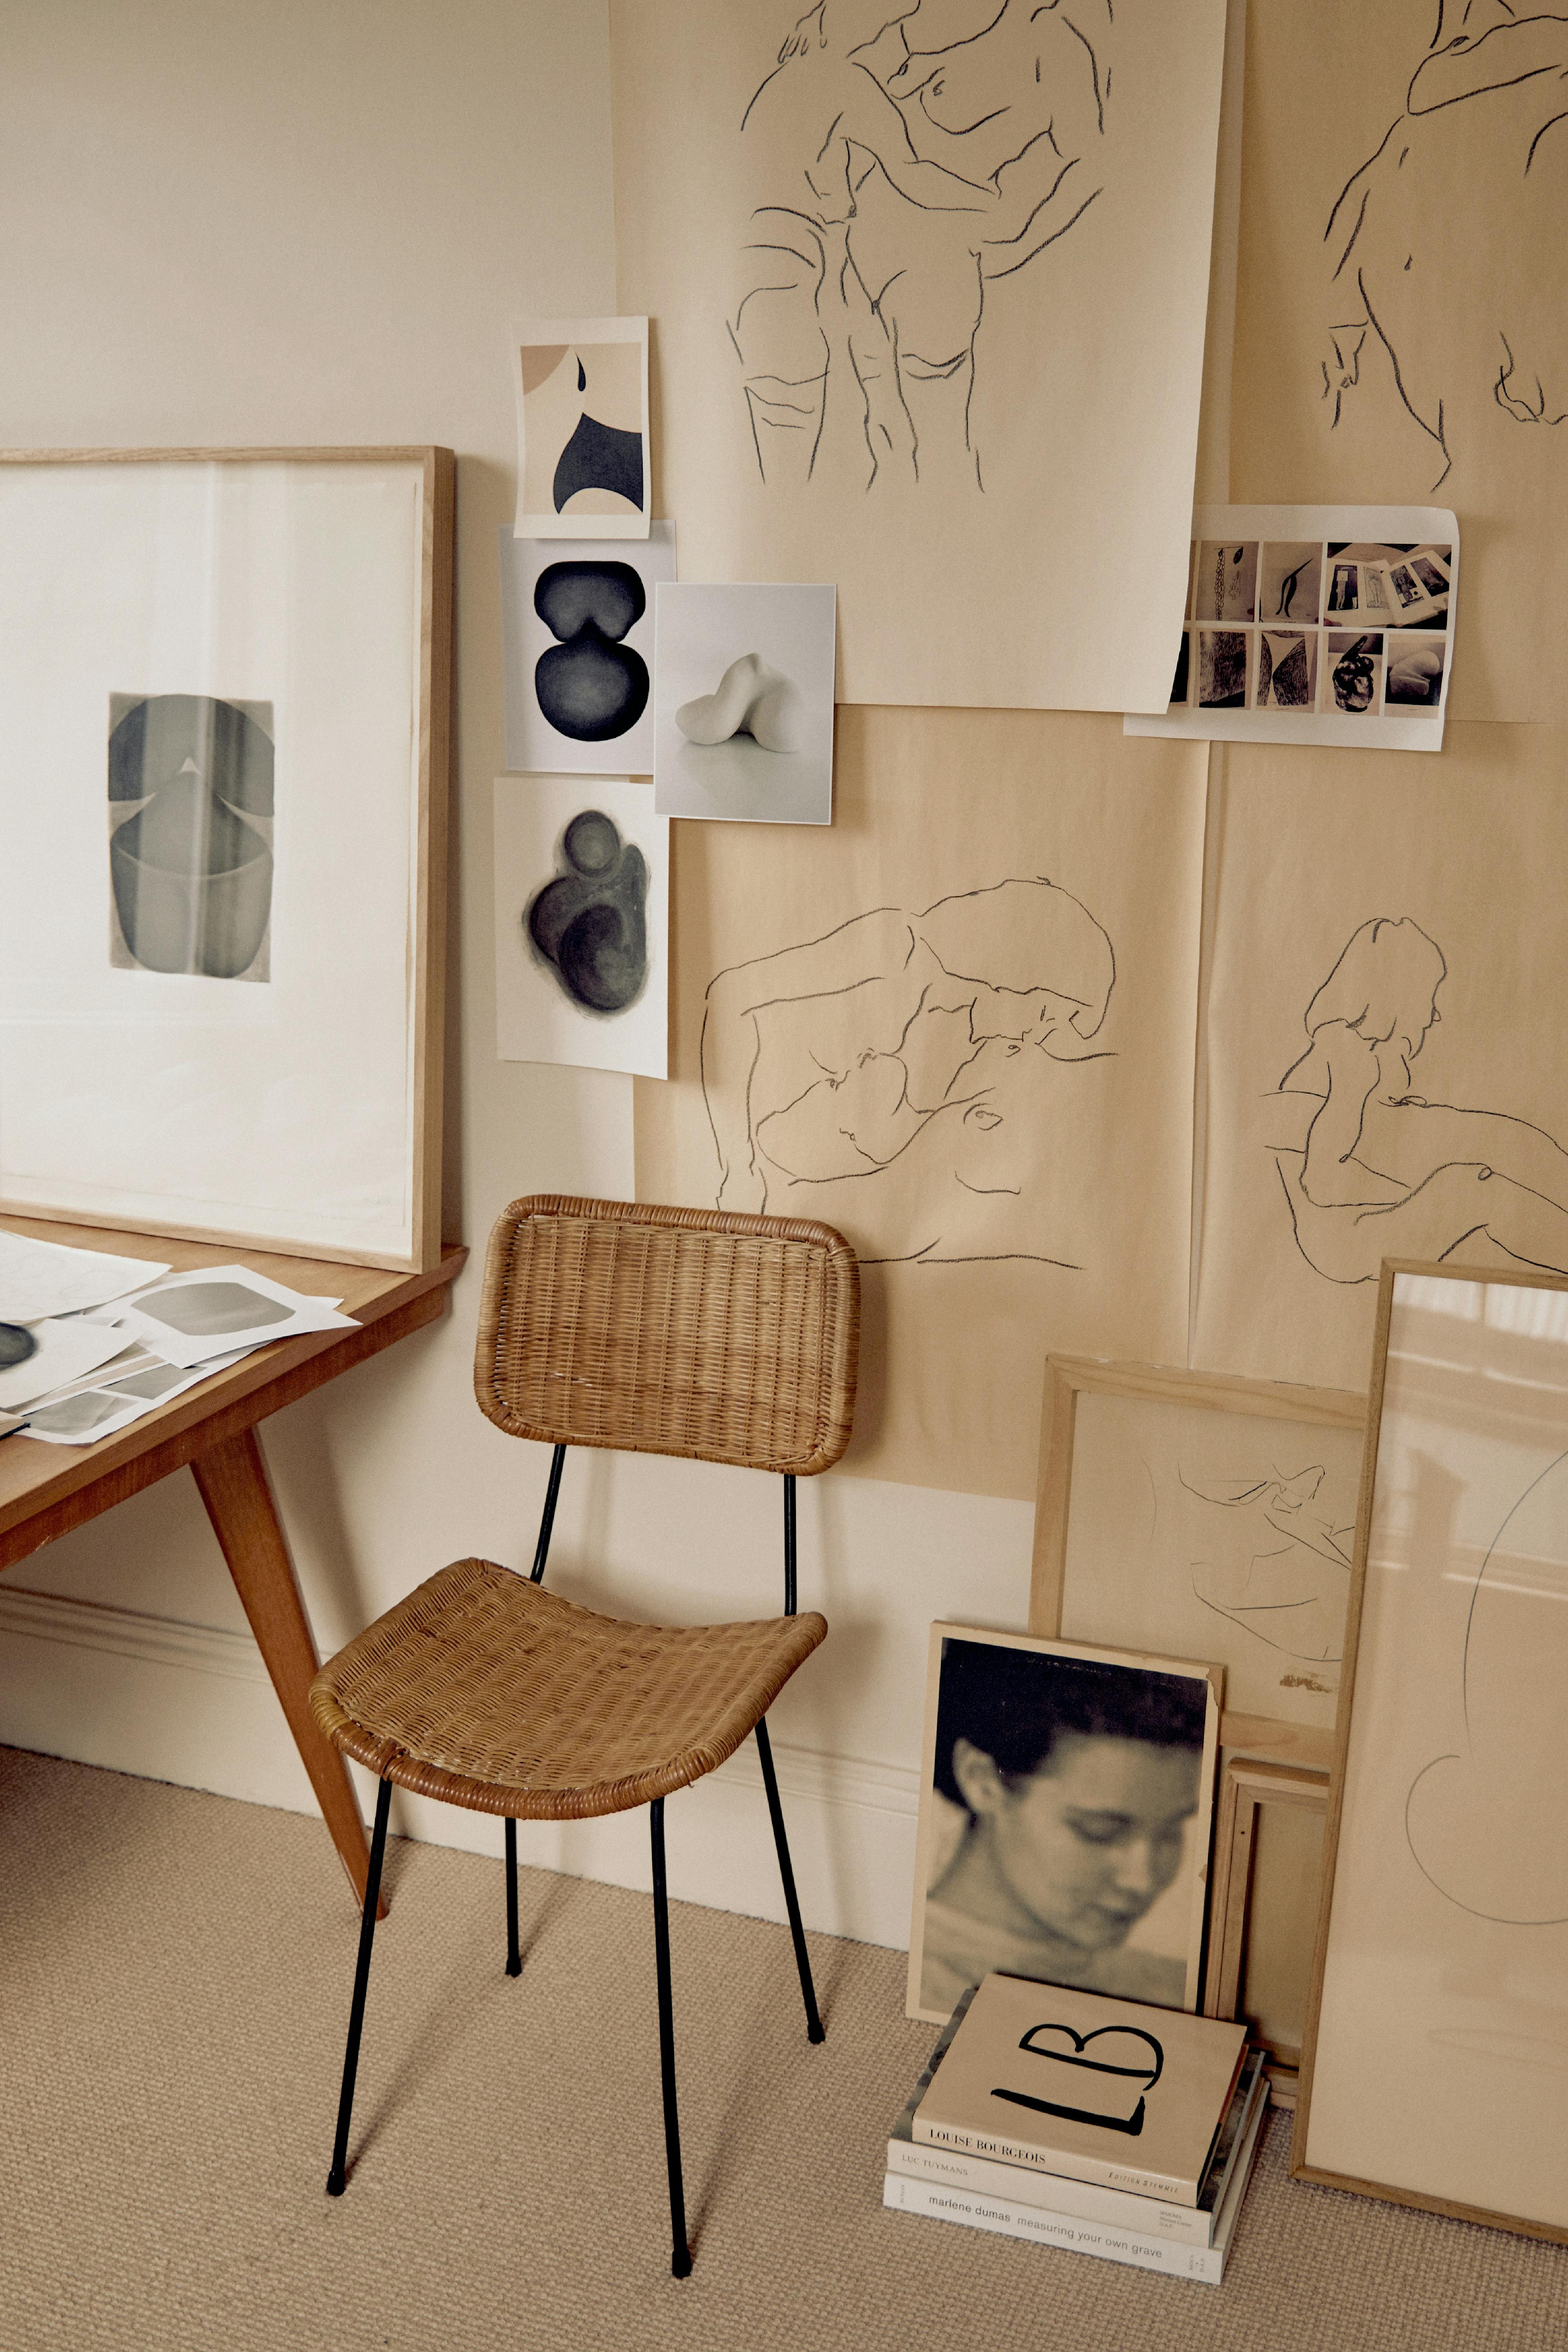 Caroline Walls' studio, with various drawings pinned to the wall and a rattan chair next to a wood table.